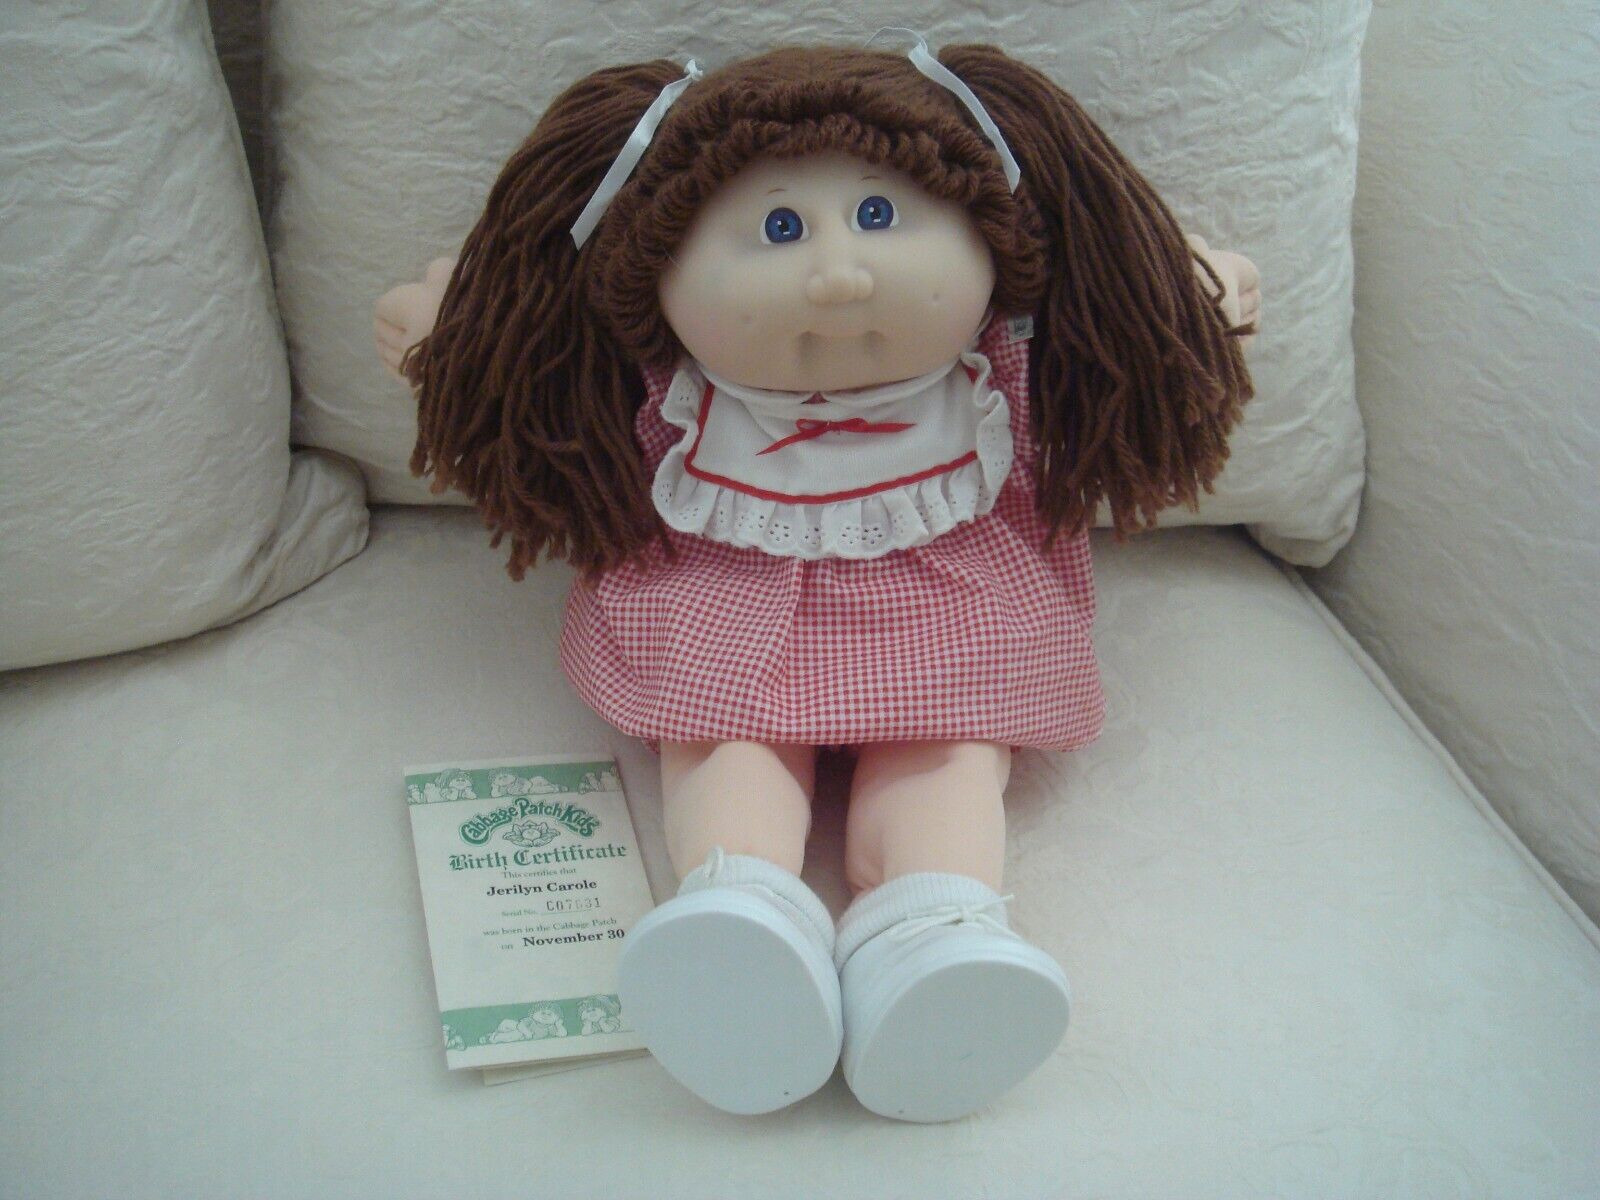  Cabbage Patch Kids 1983 15th Anniversary Doll. Brown hair, Blue eyes